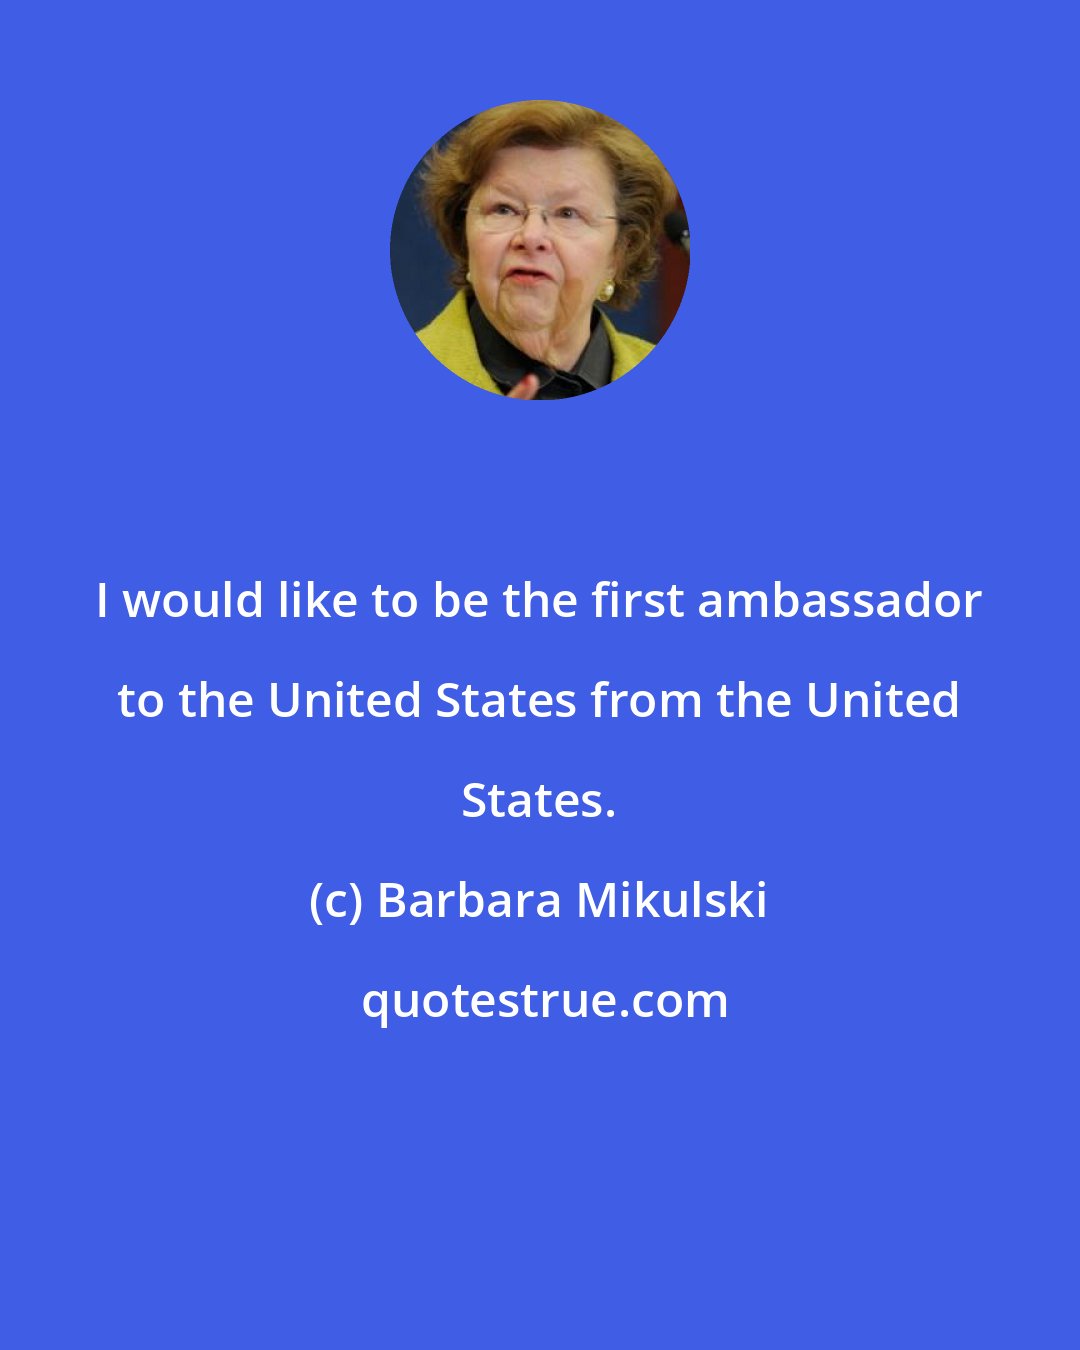 Barbara Mikulski: I would like to be the first ambassador to the United States from the United States.